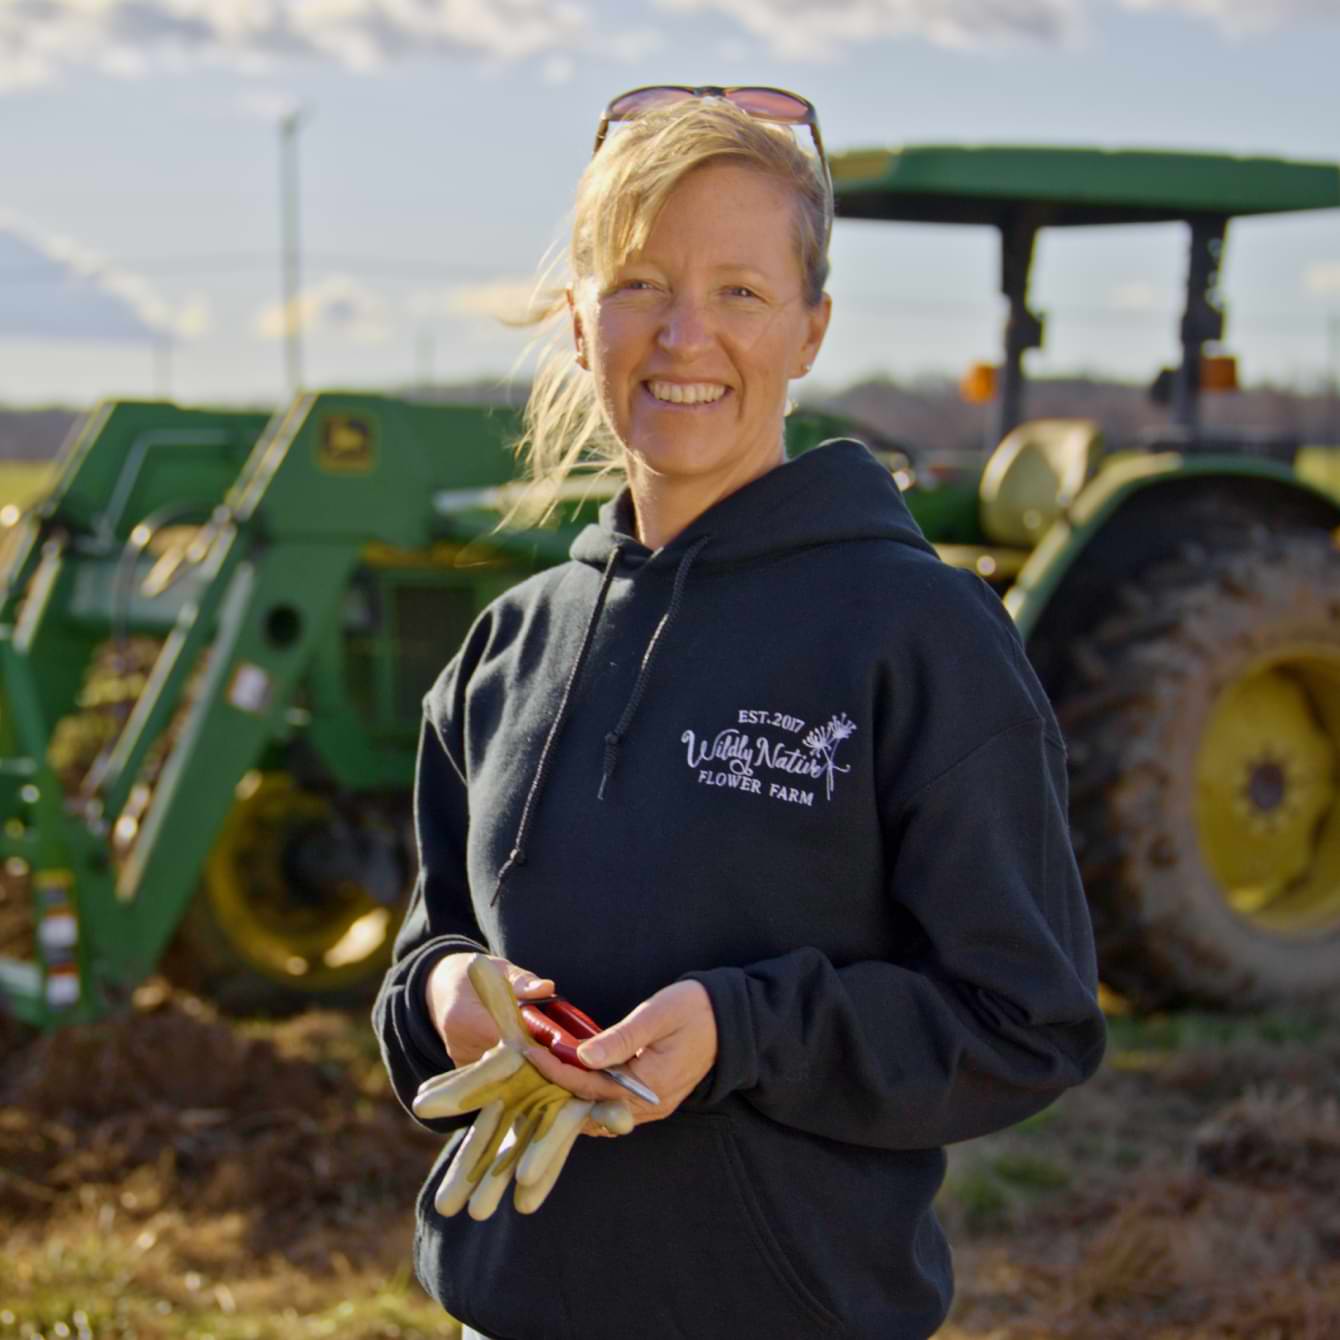 QuickBooks customer Liza Goetz, owner of a flower farm, is standing outside in front of a tractor